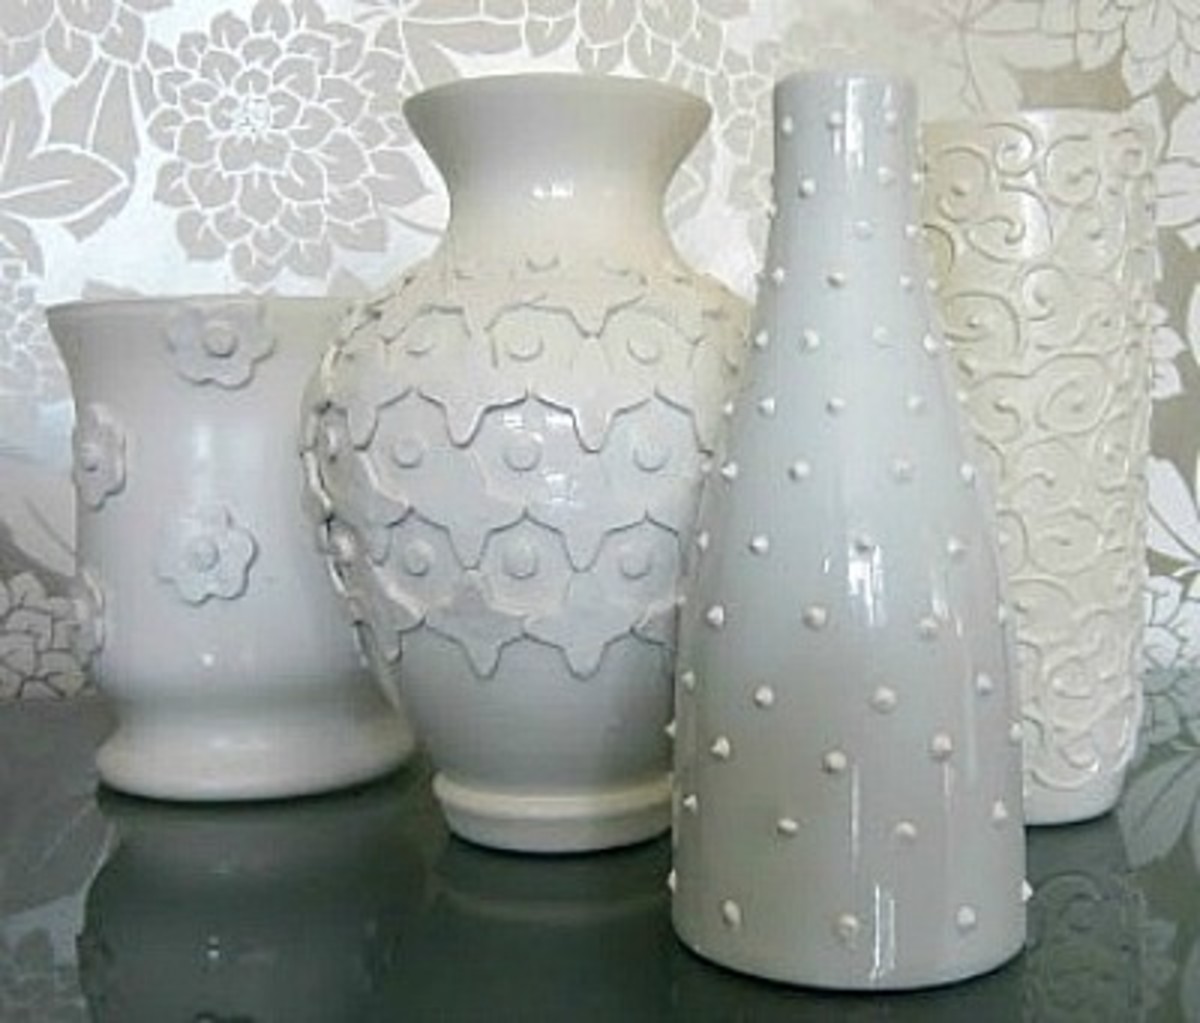 41 Ways to Reuse Old Vases Craft Ideas HubPages